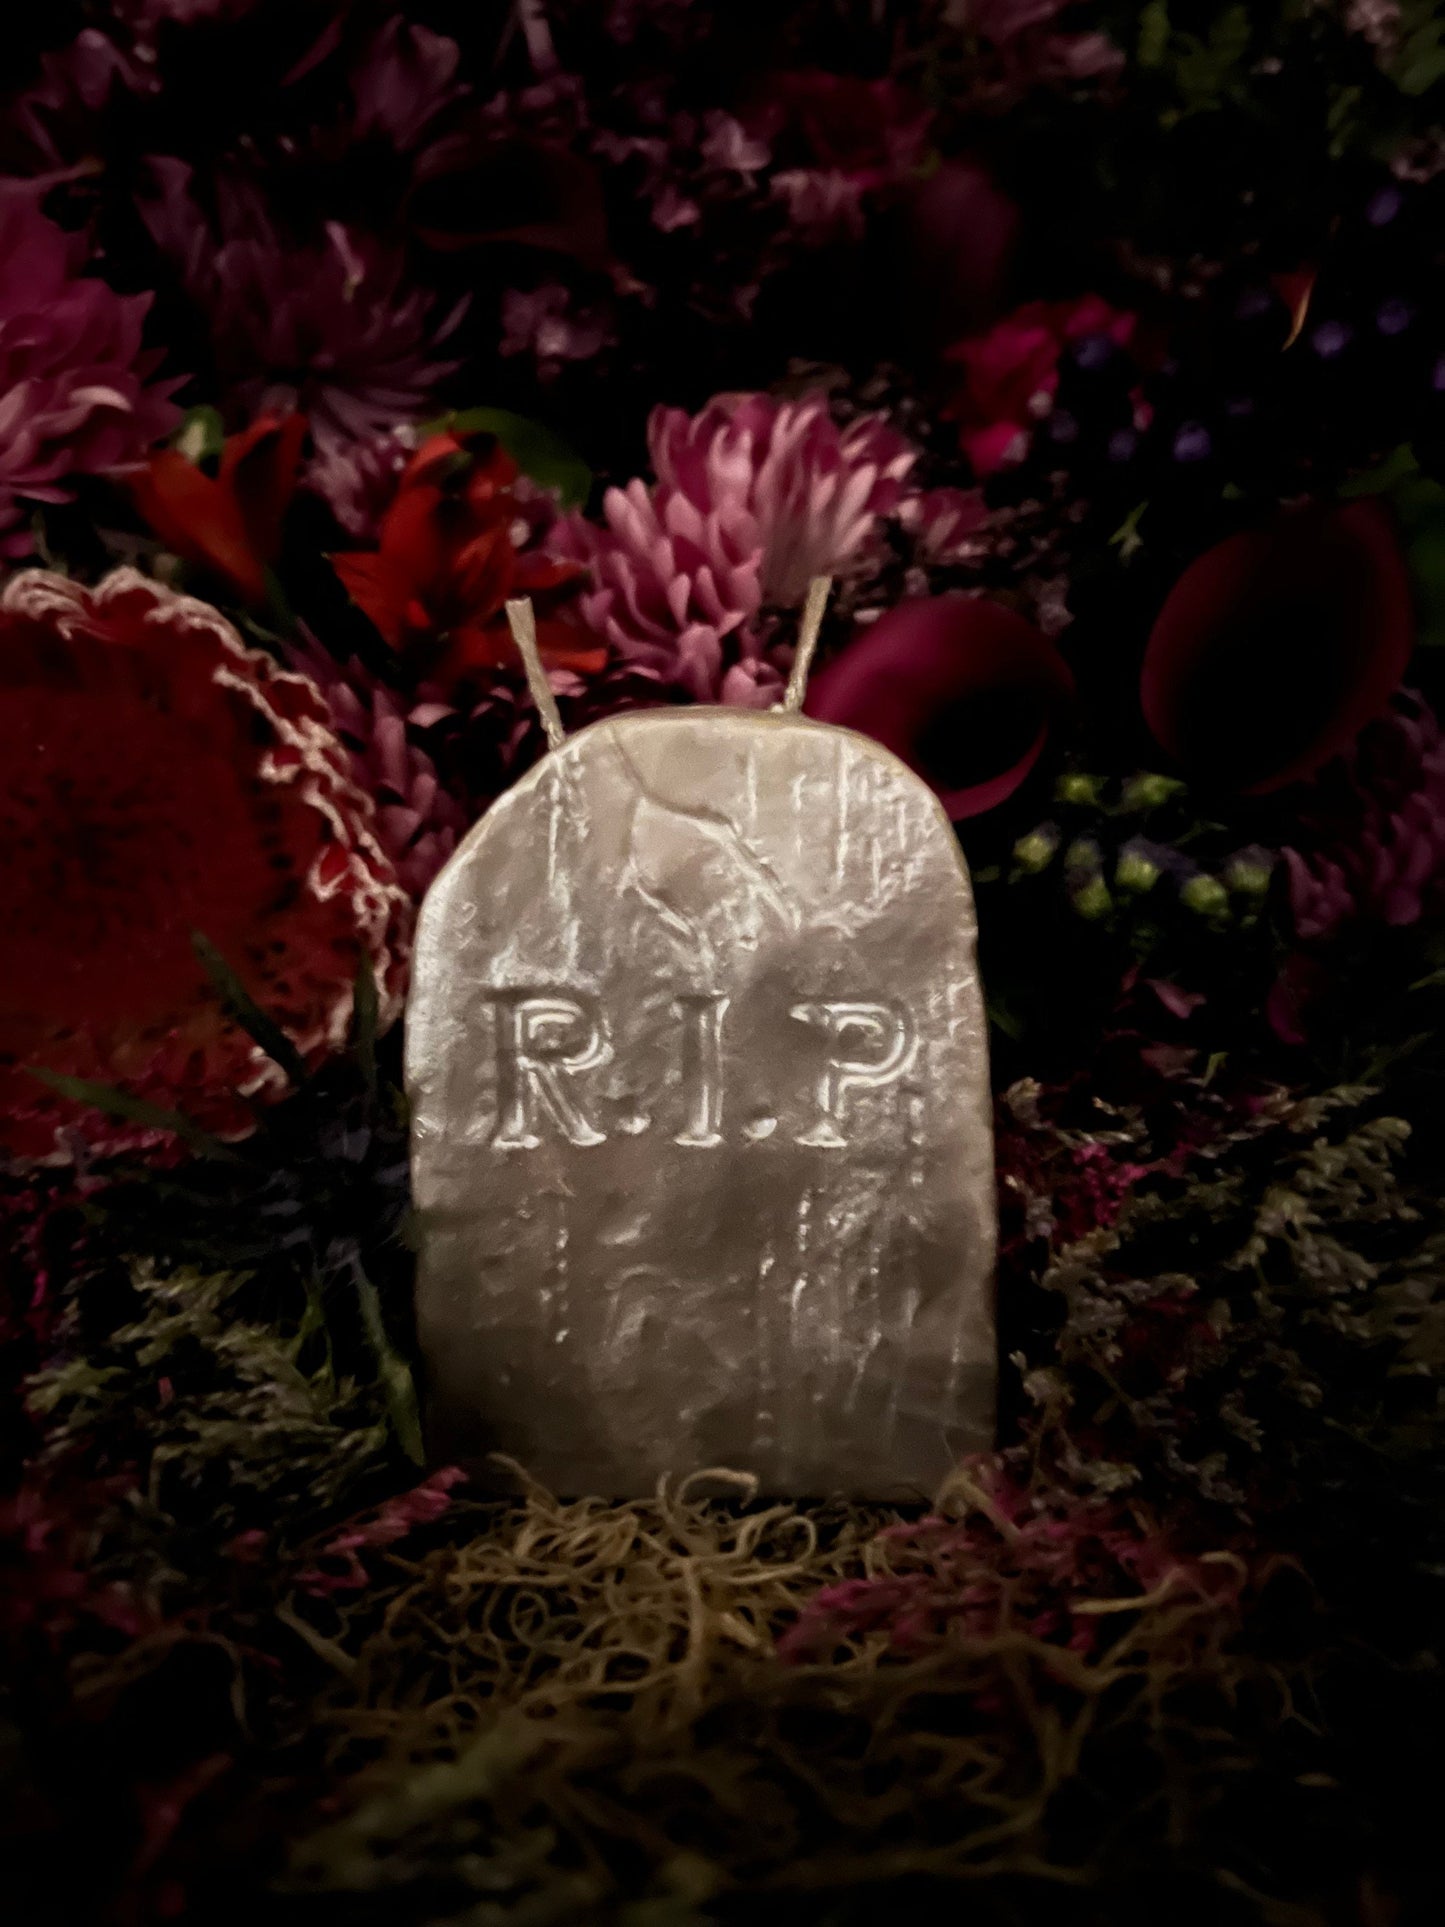 Tombstone or Headstone Candle